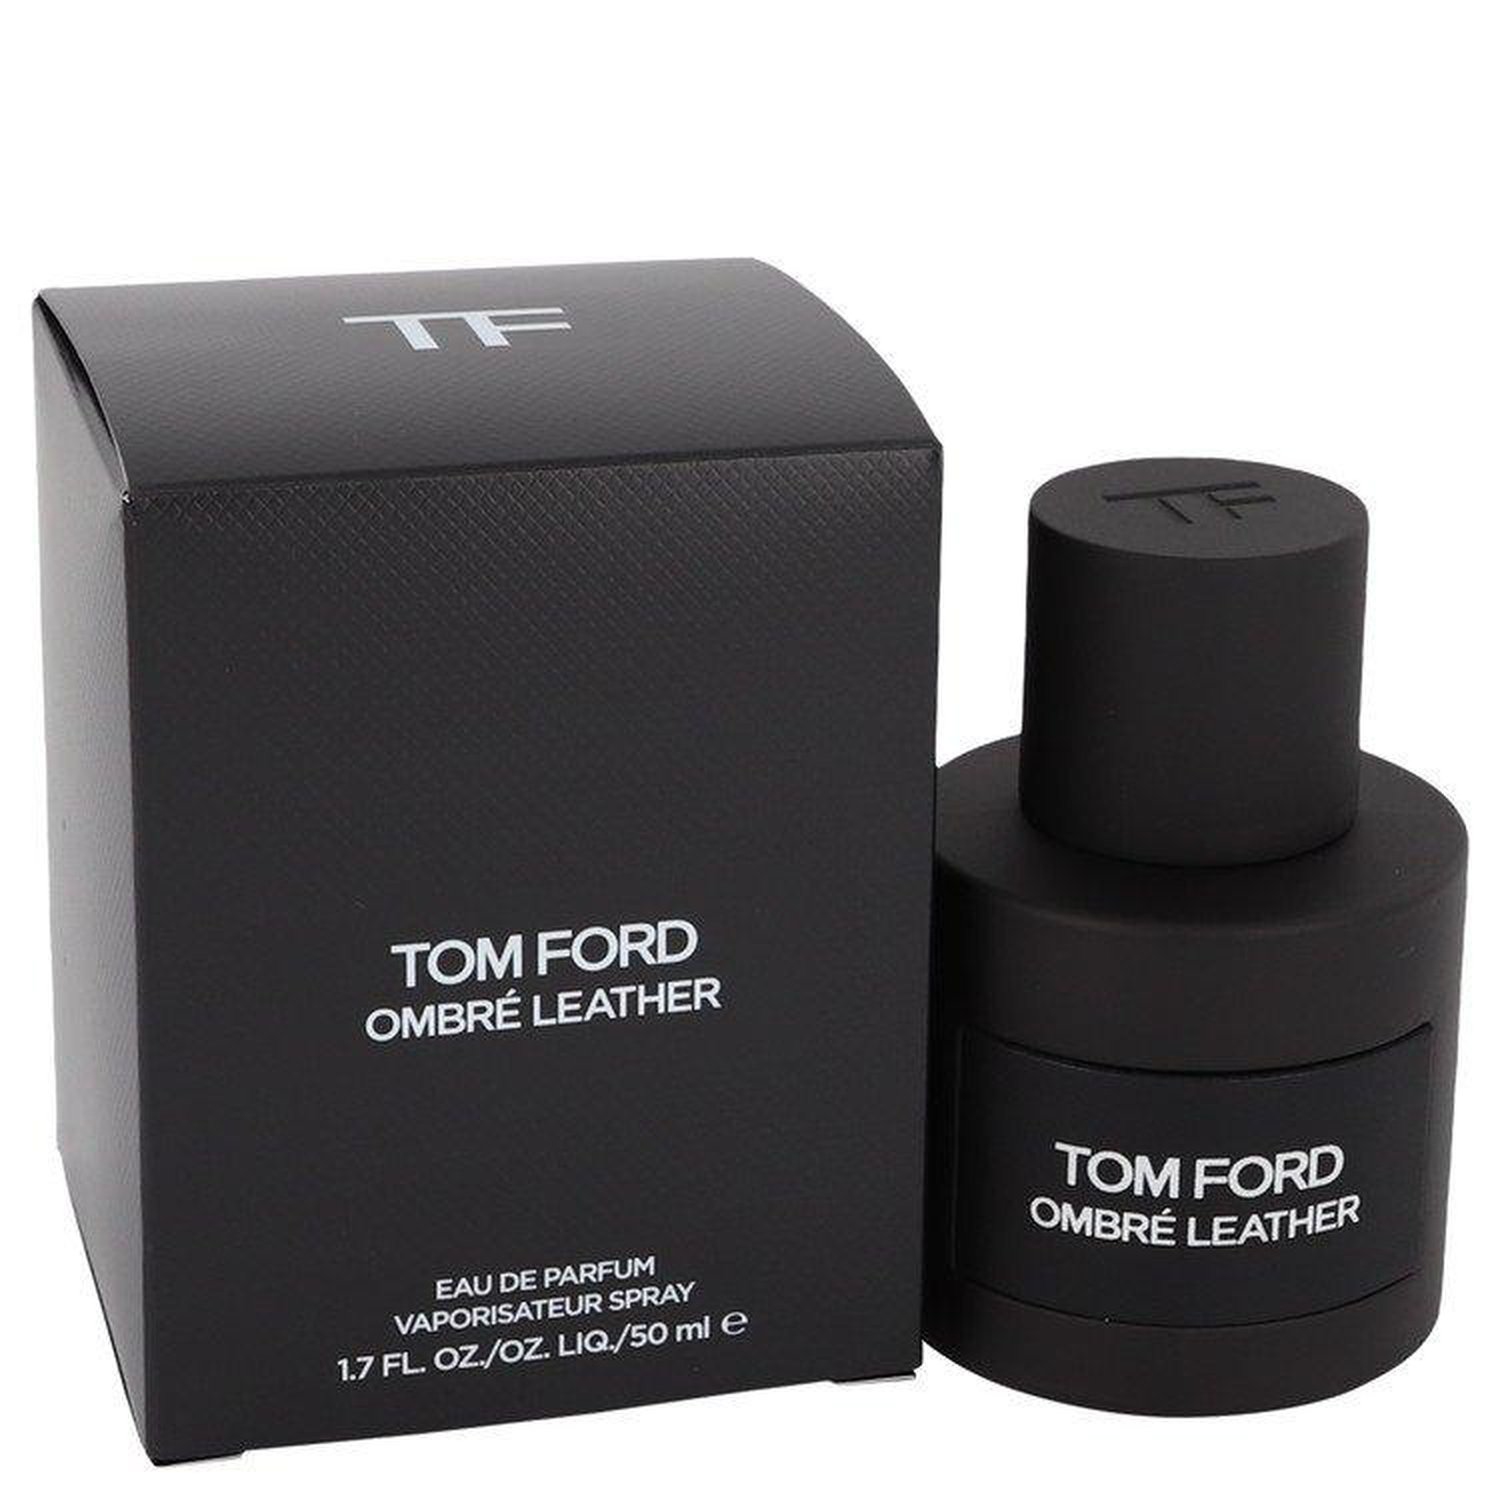 Tom Ford Ombre Leather Man EDP M 50ml Boxed